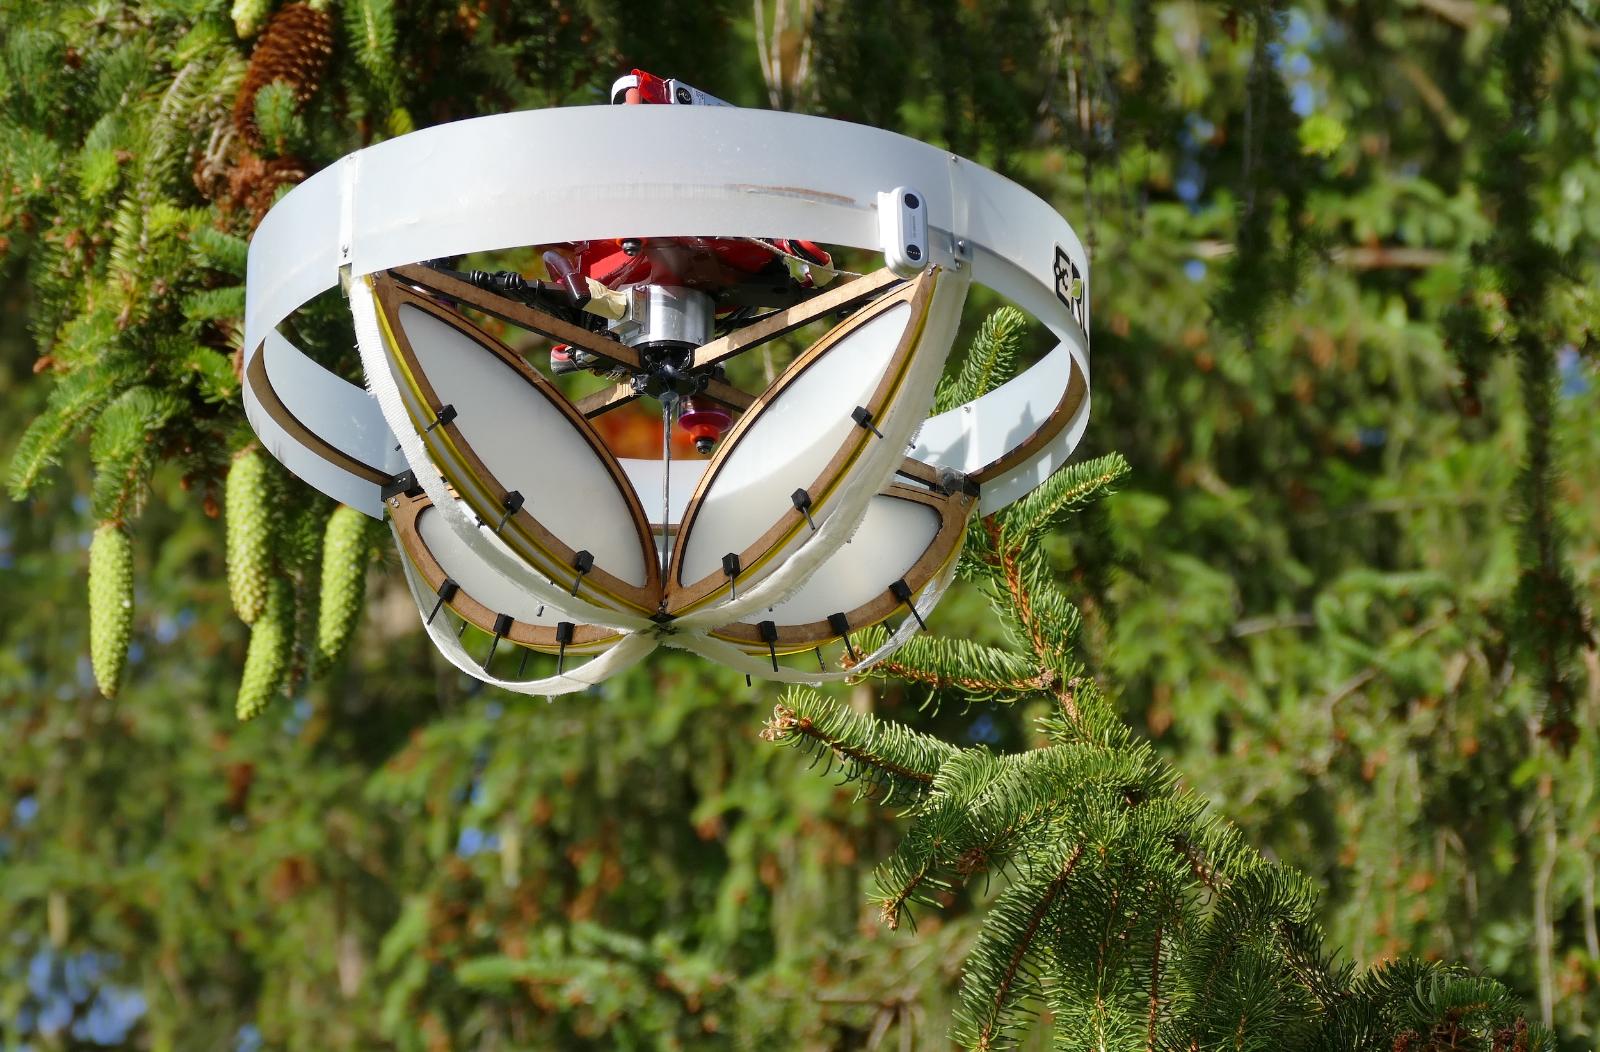 This gentle drone collects loose DNA from swaying tree branches